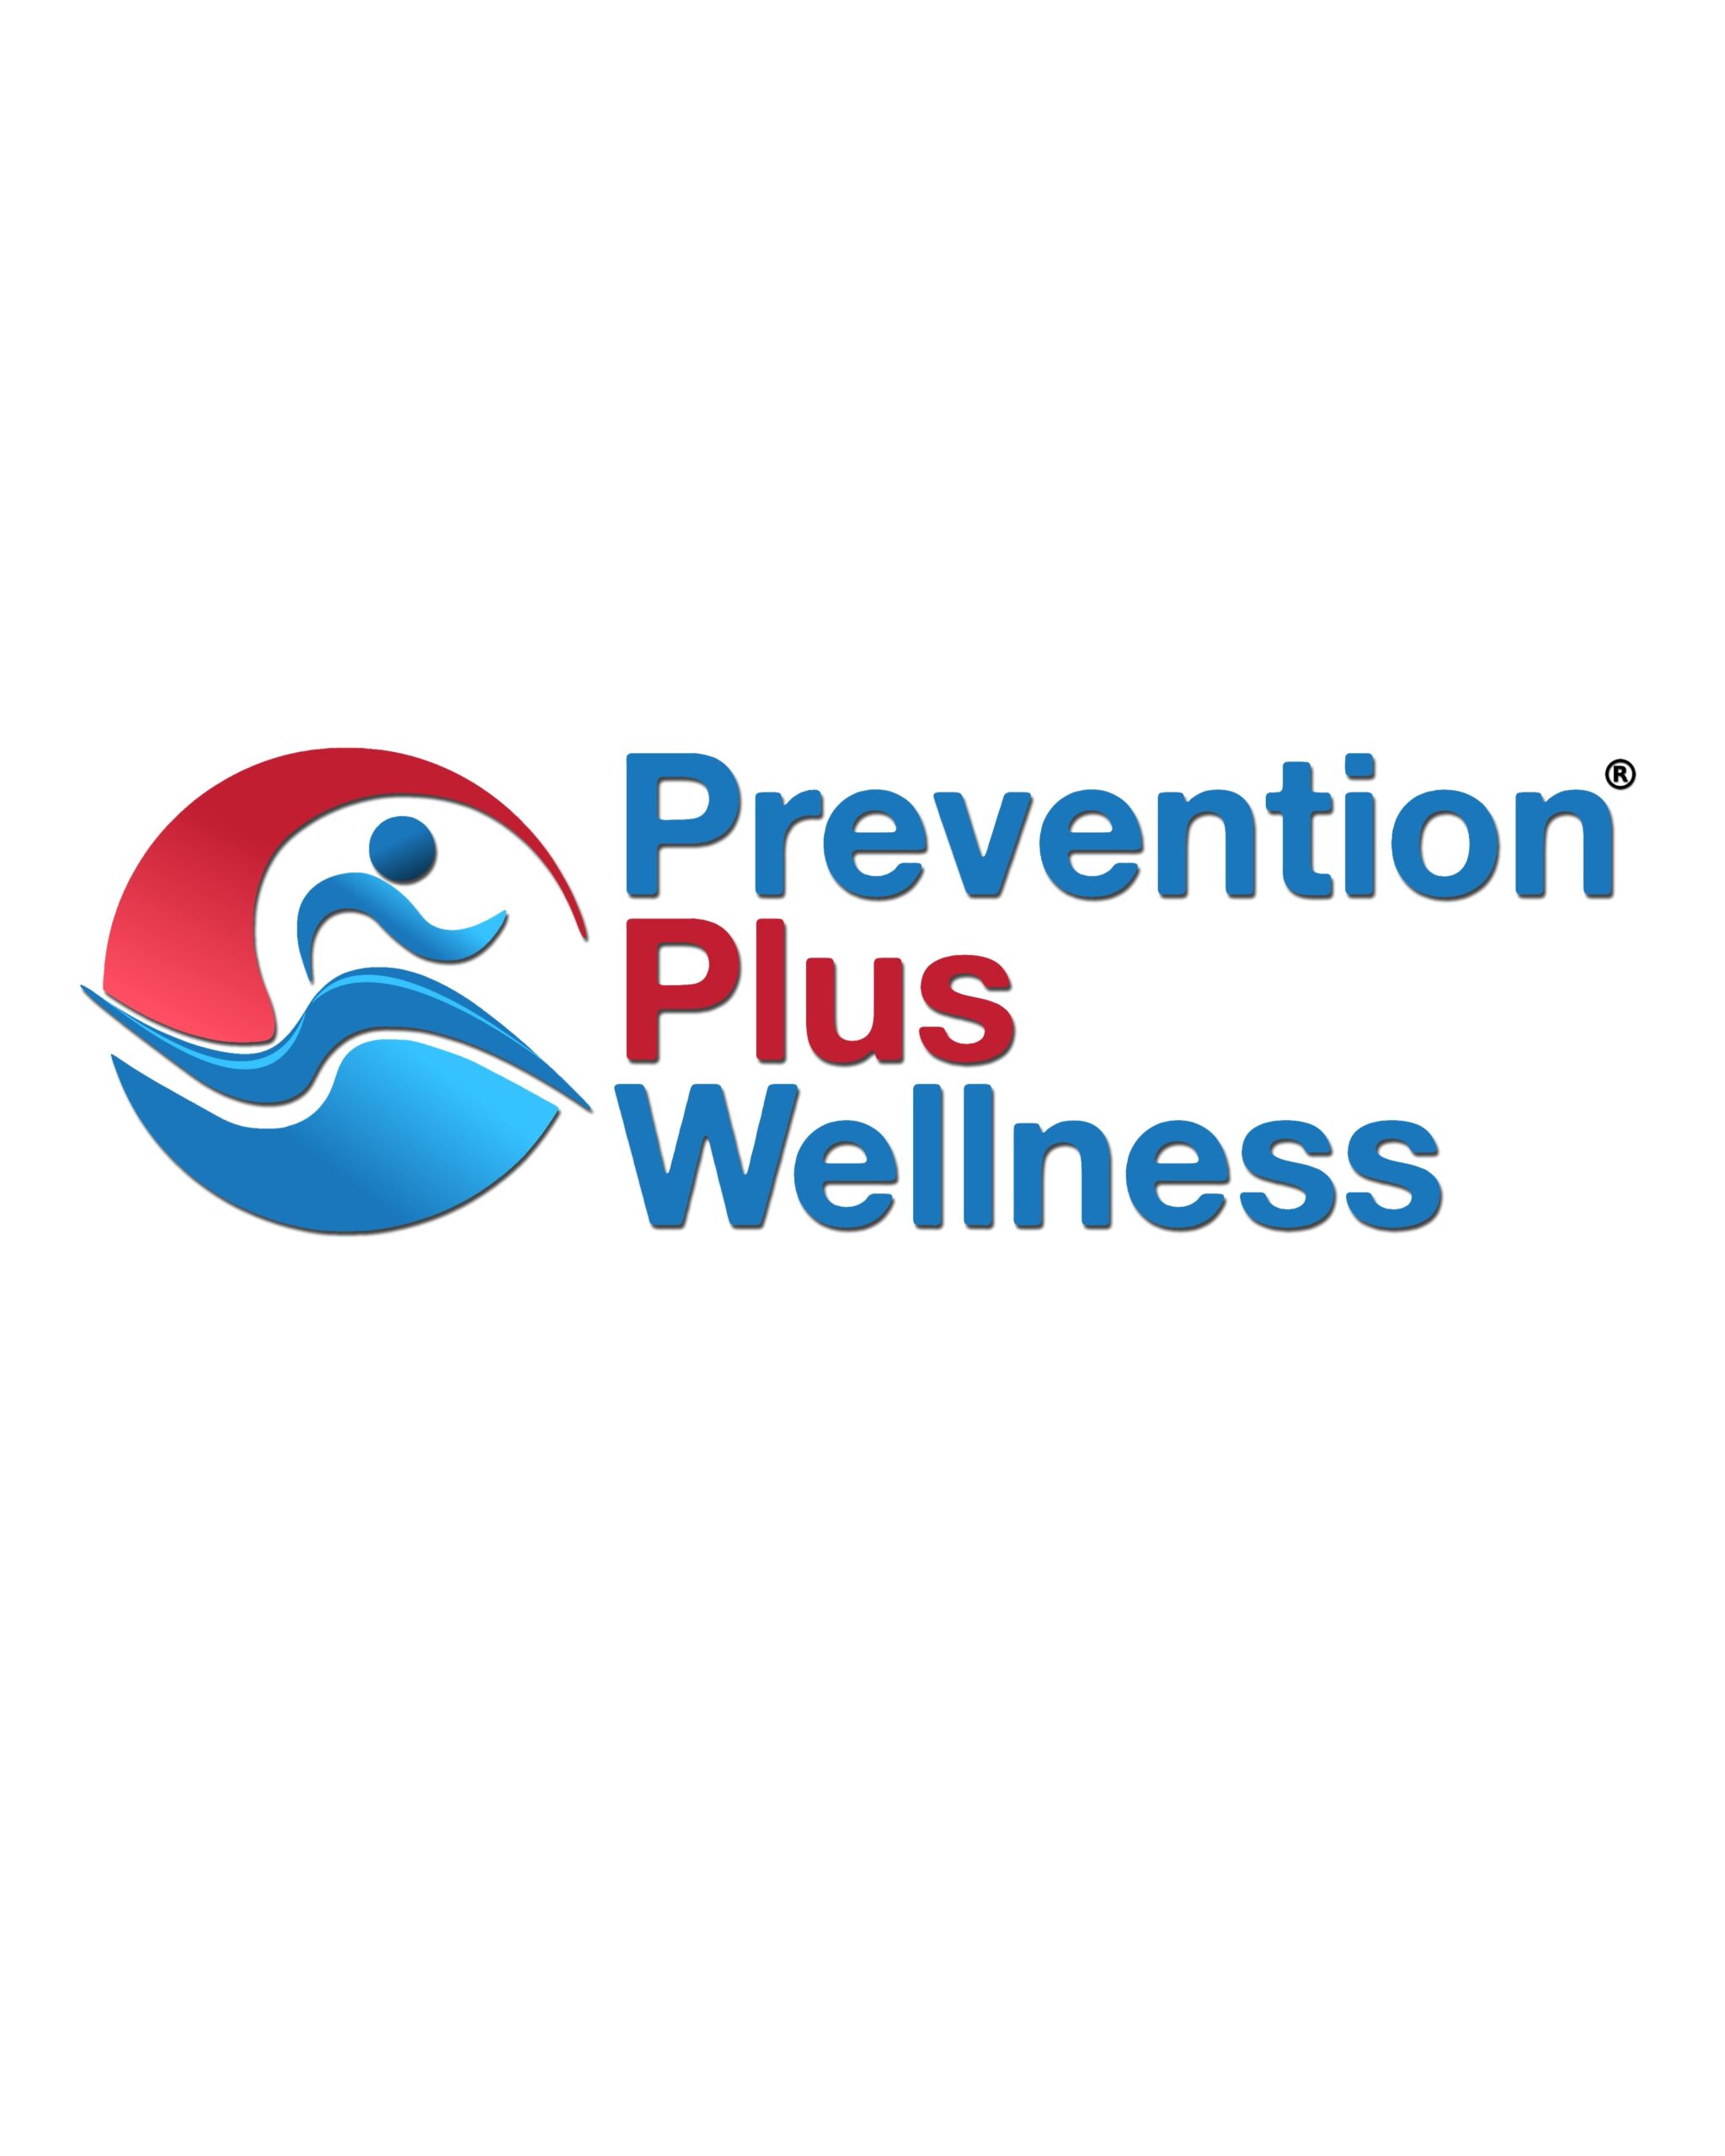 Prevention Plus Wellness educational programs for youth and adults.